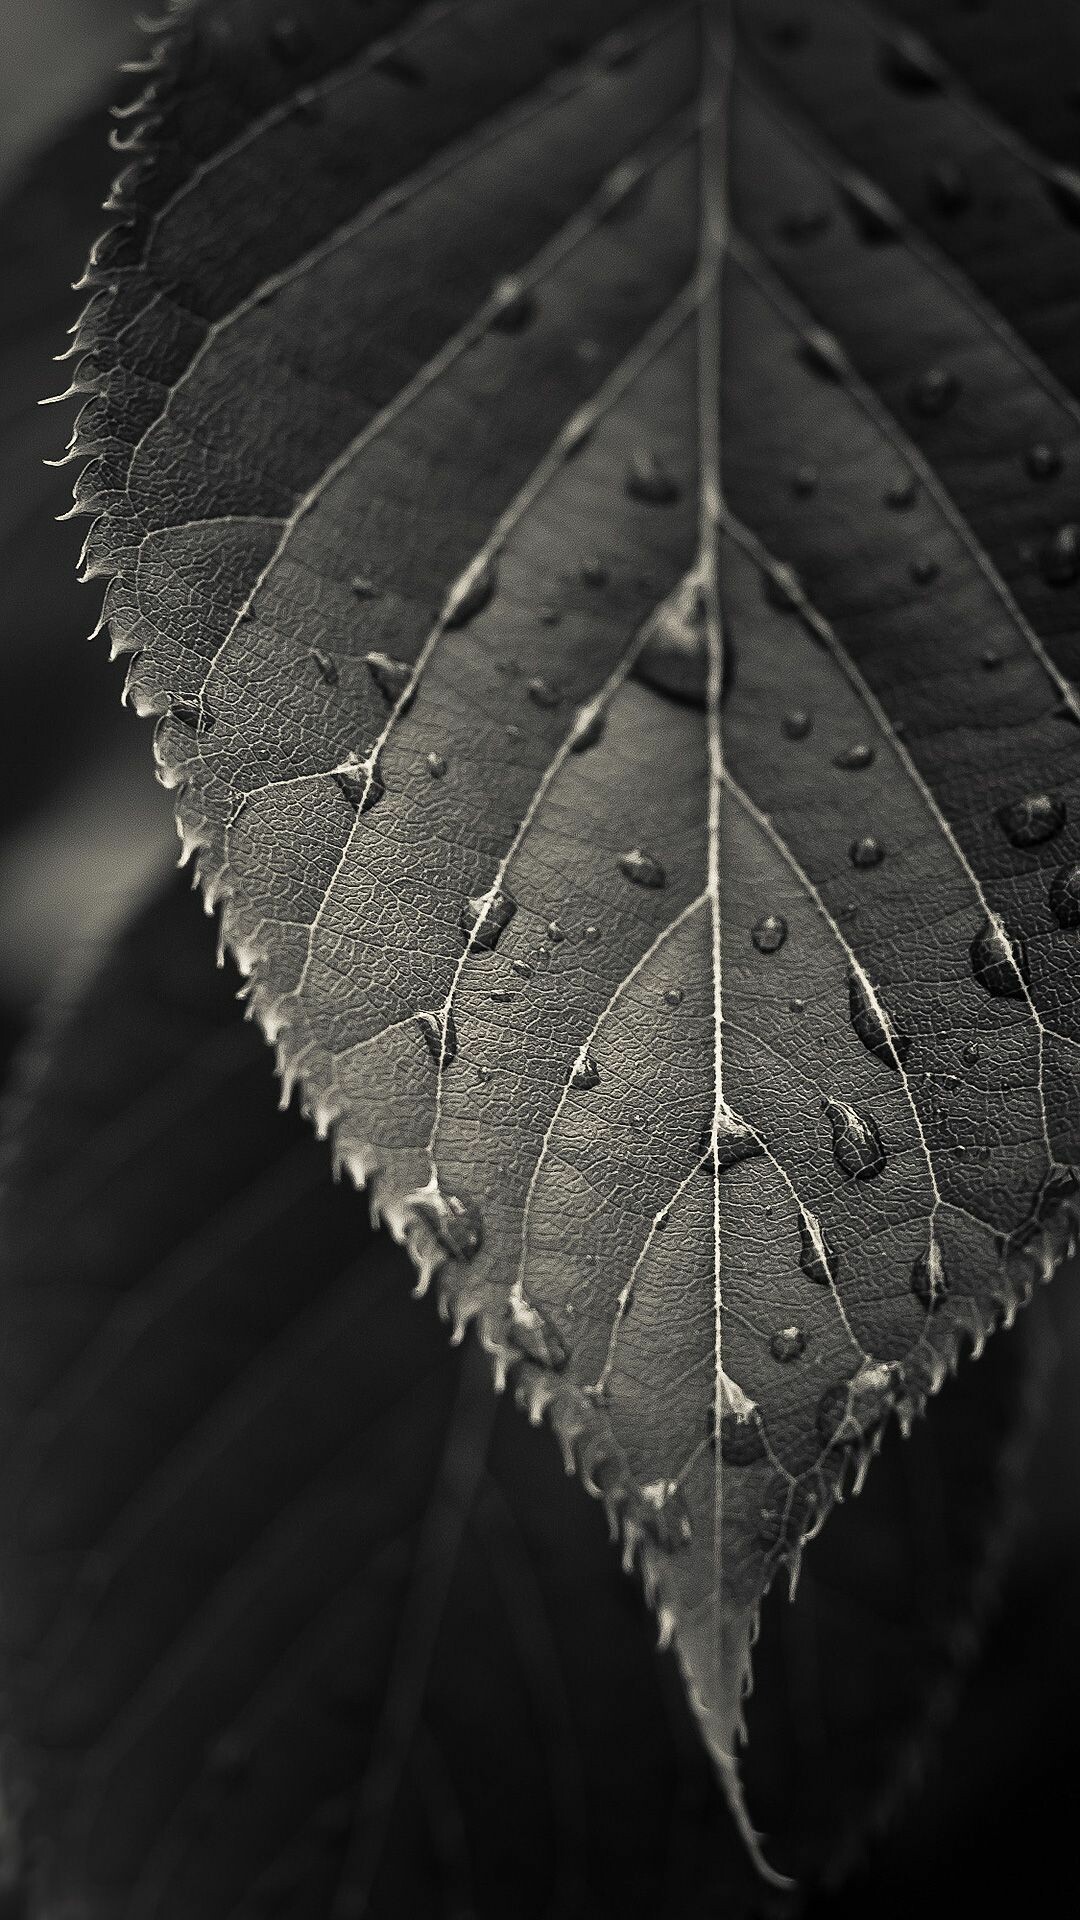 Leaf: Function to store chemical energy and water in the plant. 1080x1920 Full HD Wallpaper.